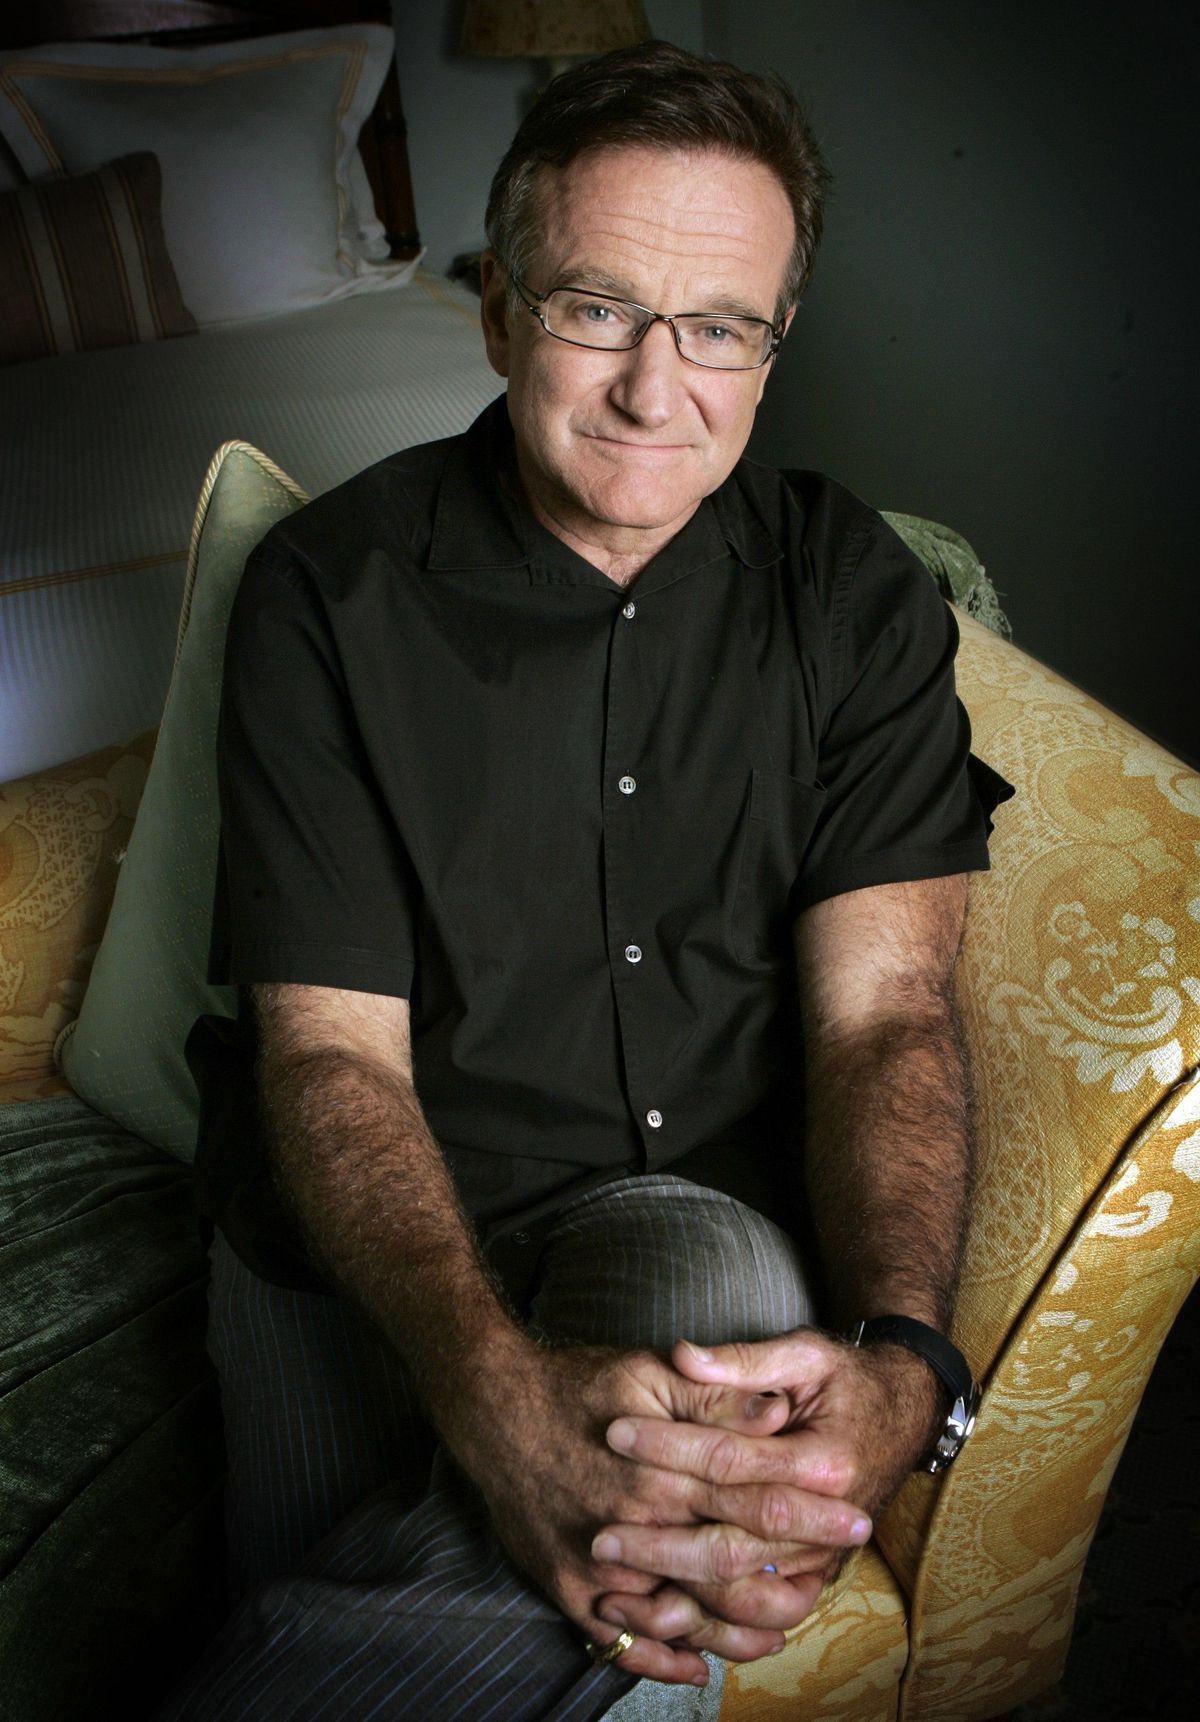 Actor and comedian Robin Williams poses for photos to promote his film "License To Wed" in in 2007. Williams, who died, Aug. 11, 2014, is the subject of a heartfelt film portrait, “Robin Williams: Come Inside My Mind.” (Reed Saxon / File/Associated Press)